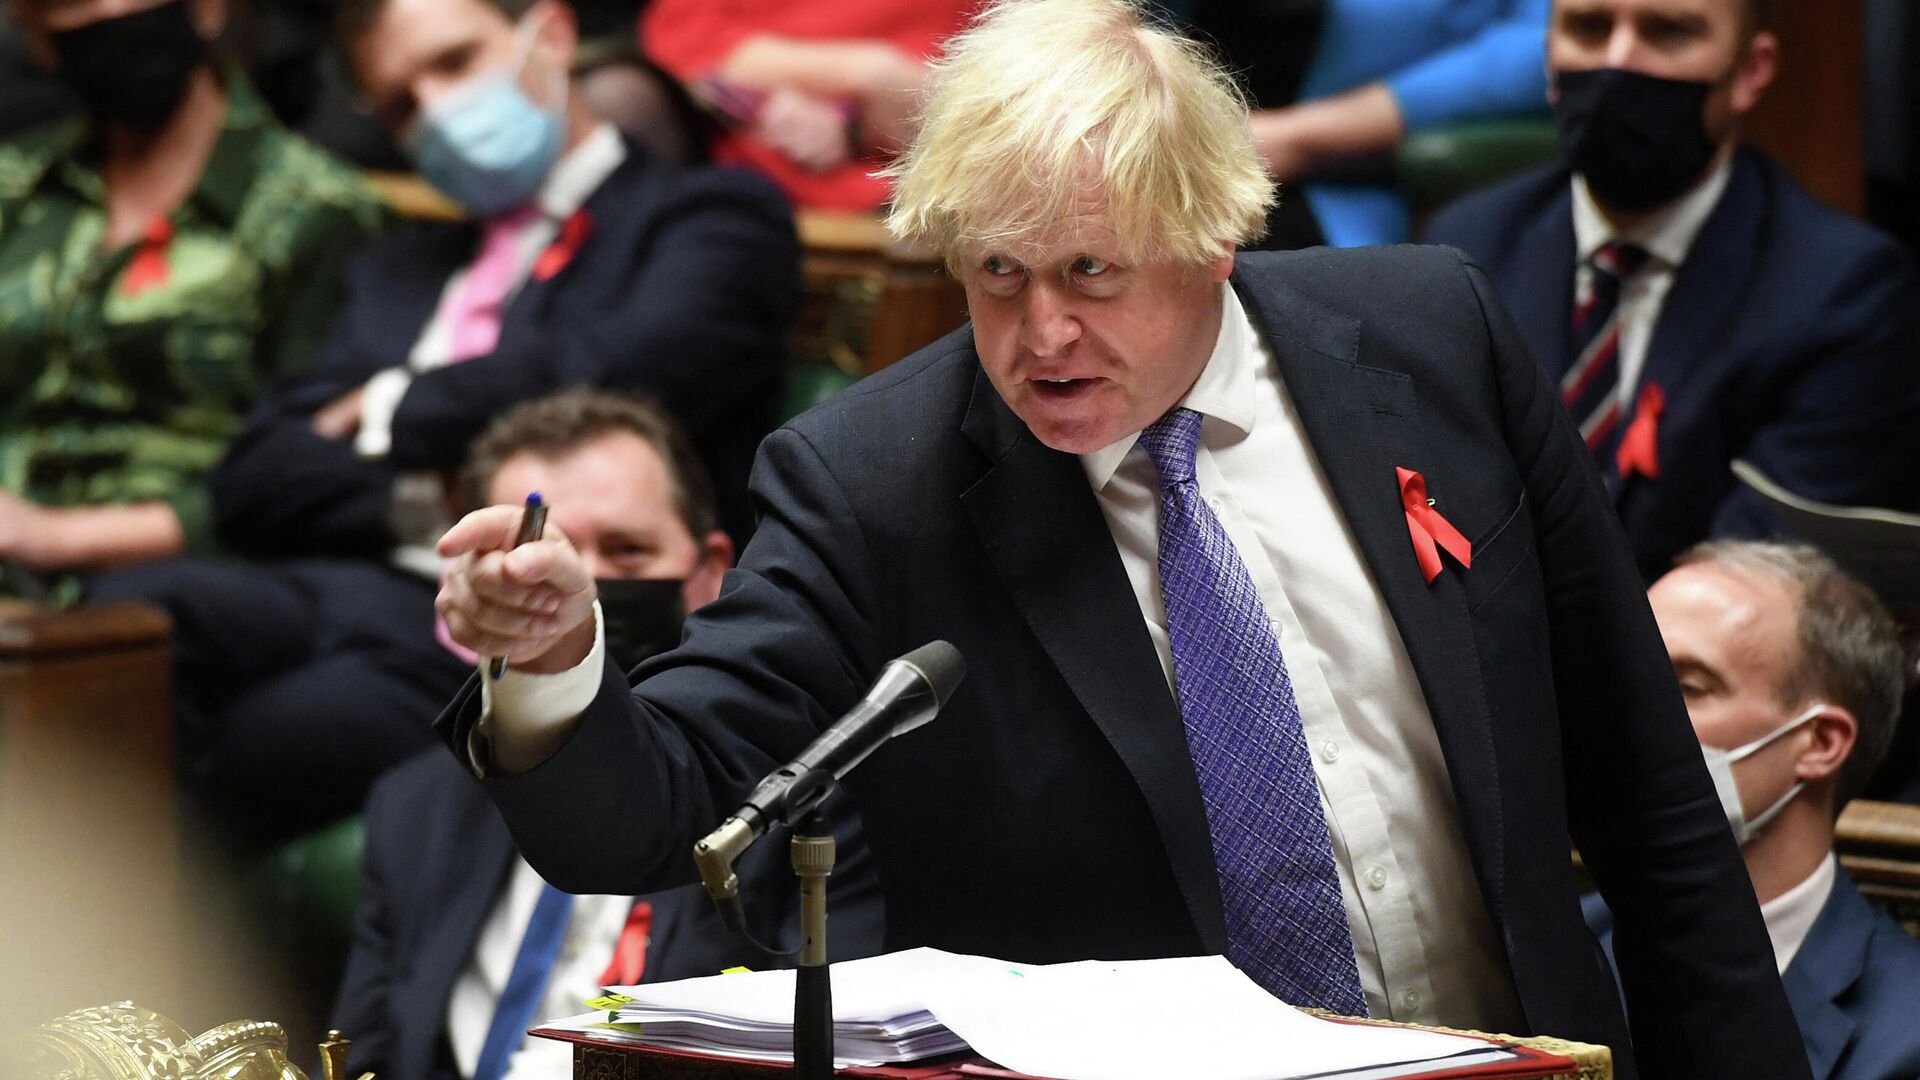 A handout photograph released by the UK Parliament shows Britain's Prime Minister Boris Johnson gesturing as he speaks during Prime Minister's Questions (PMQs) in the House of Commons in London on December 1, 2021 - Sputnik International, 1920, 12.01.2022